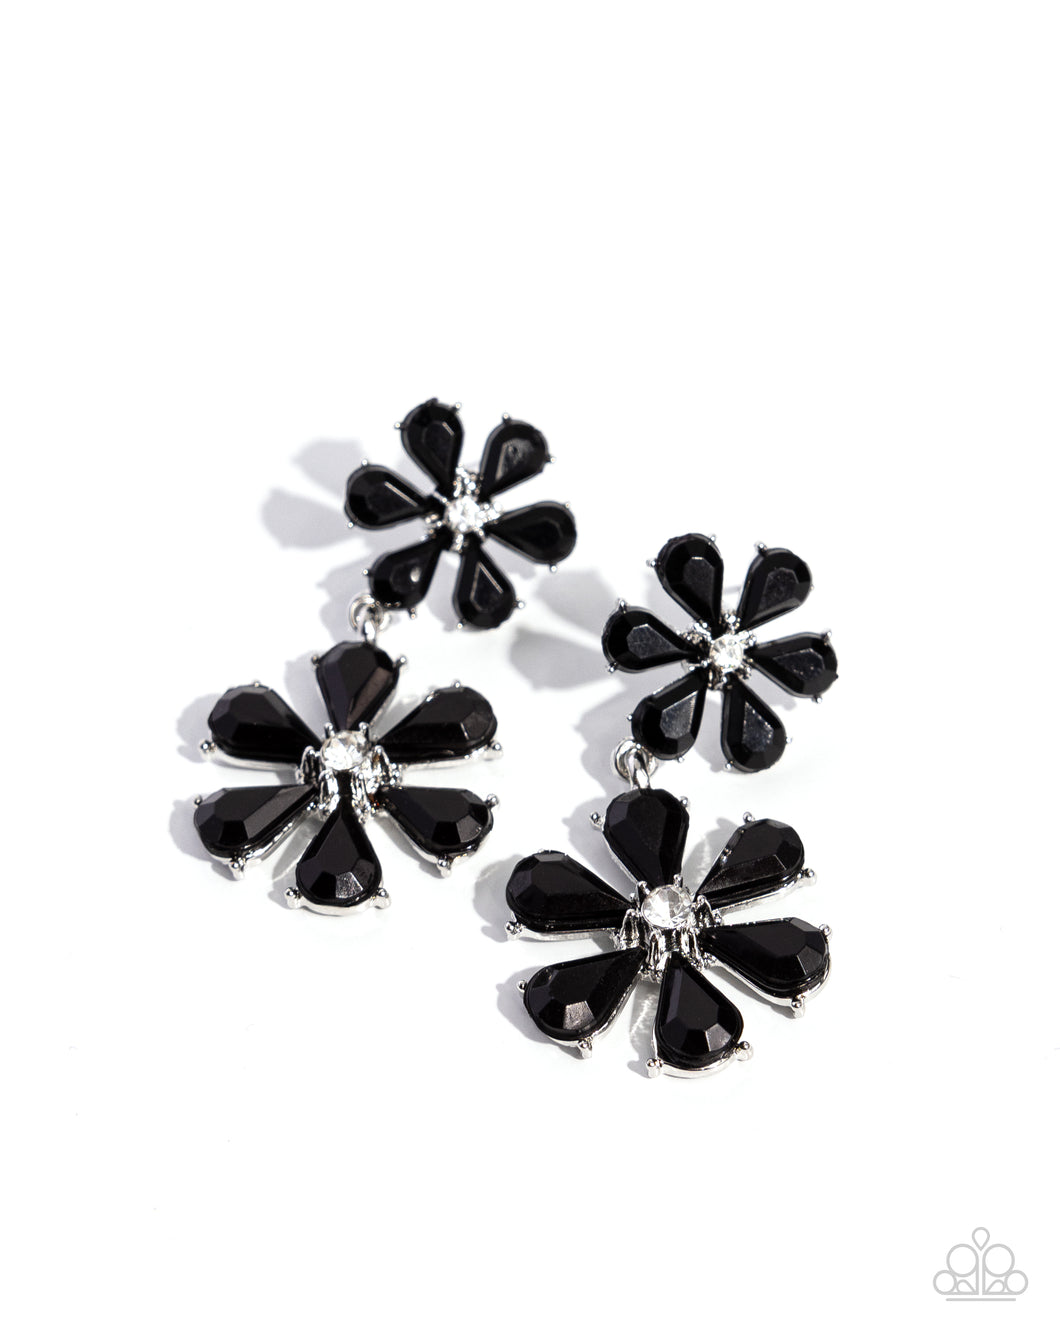 A Blast of Blossoms - Black Earring